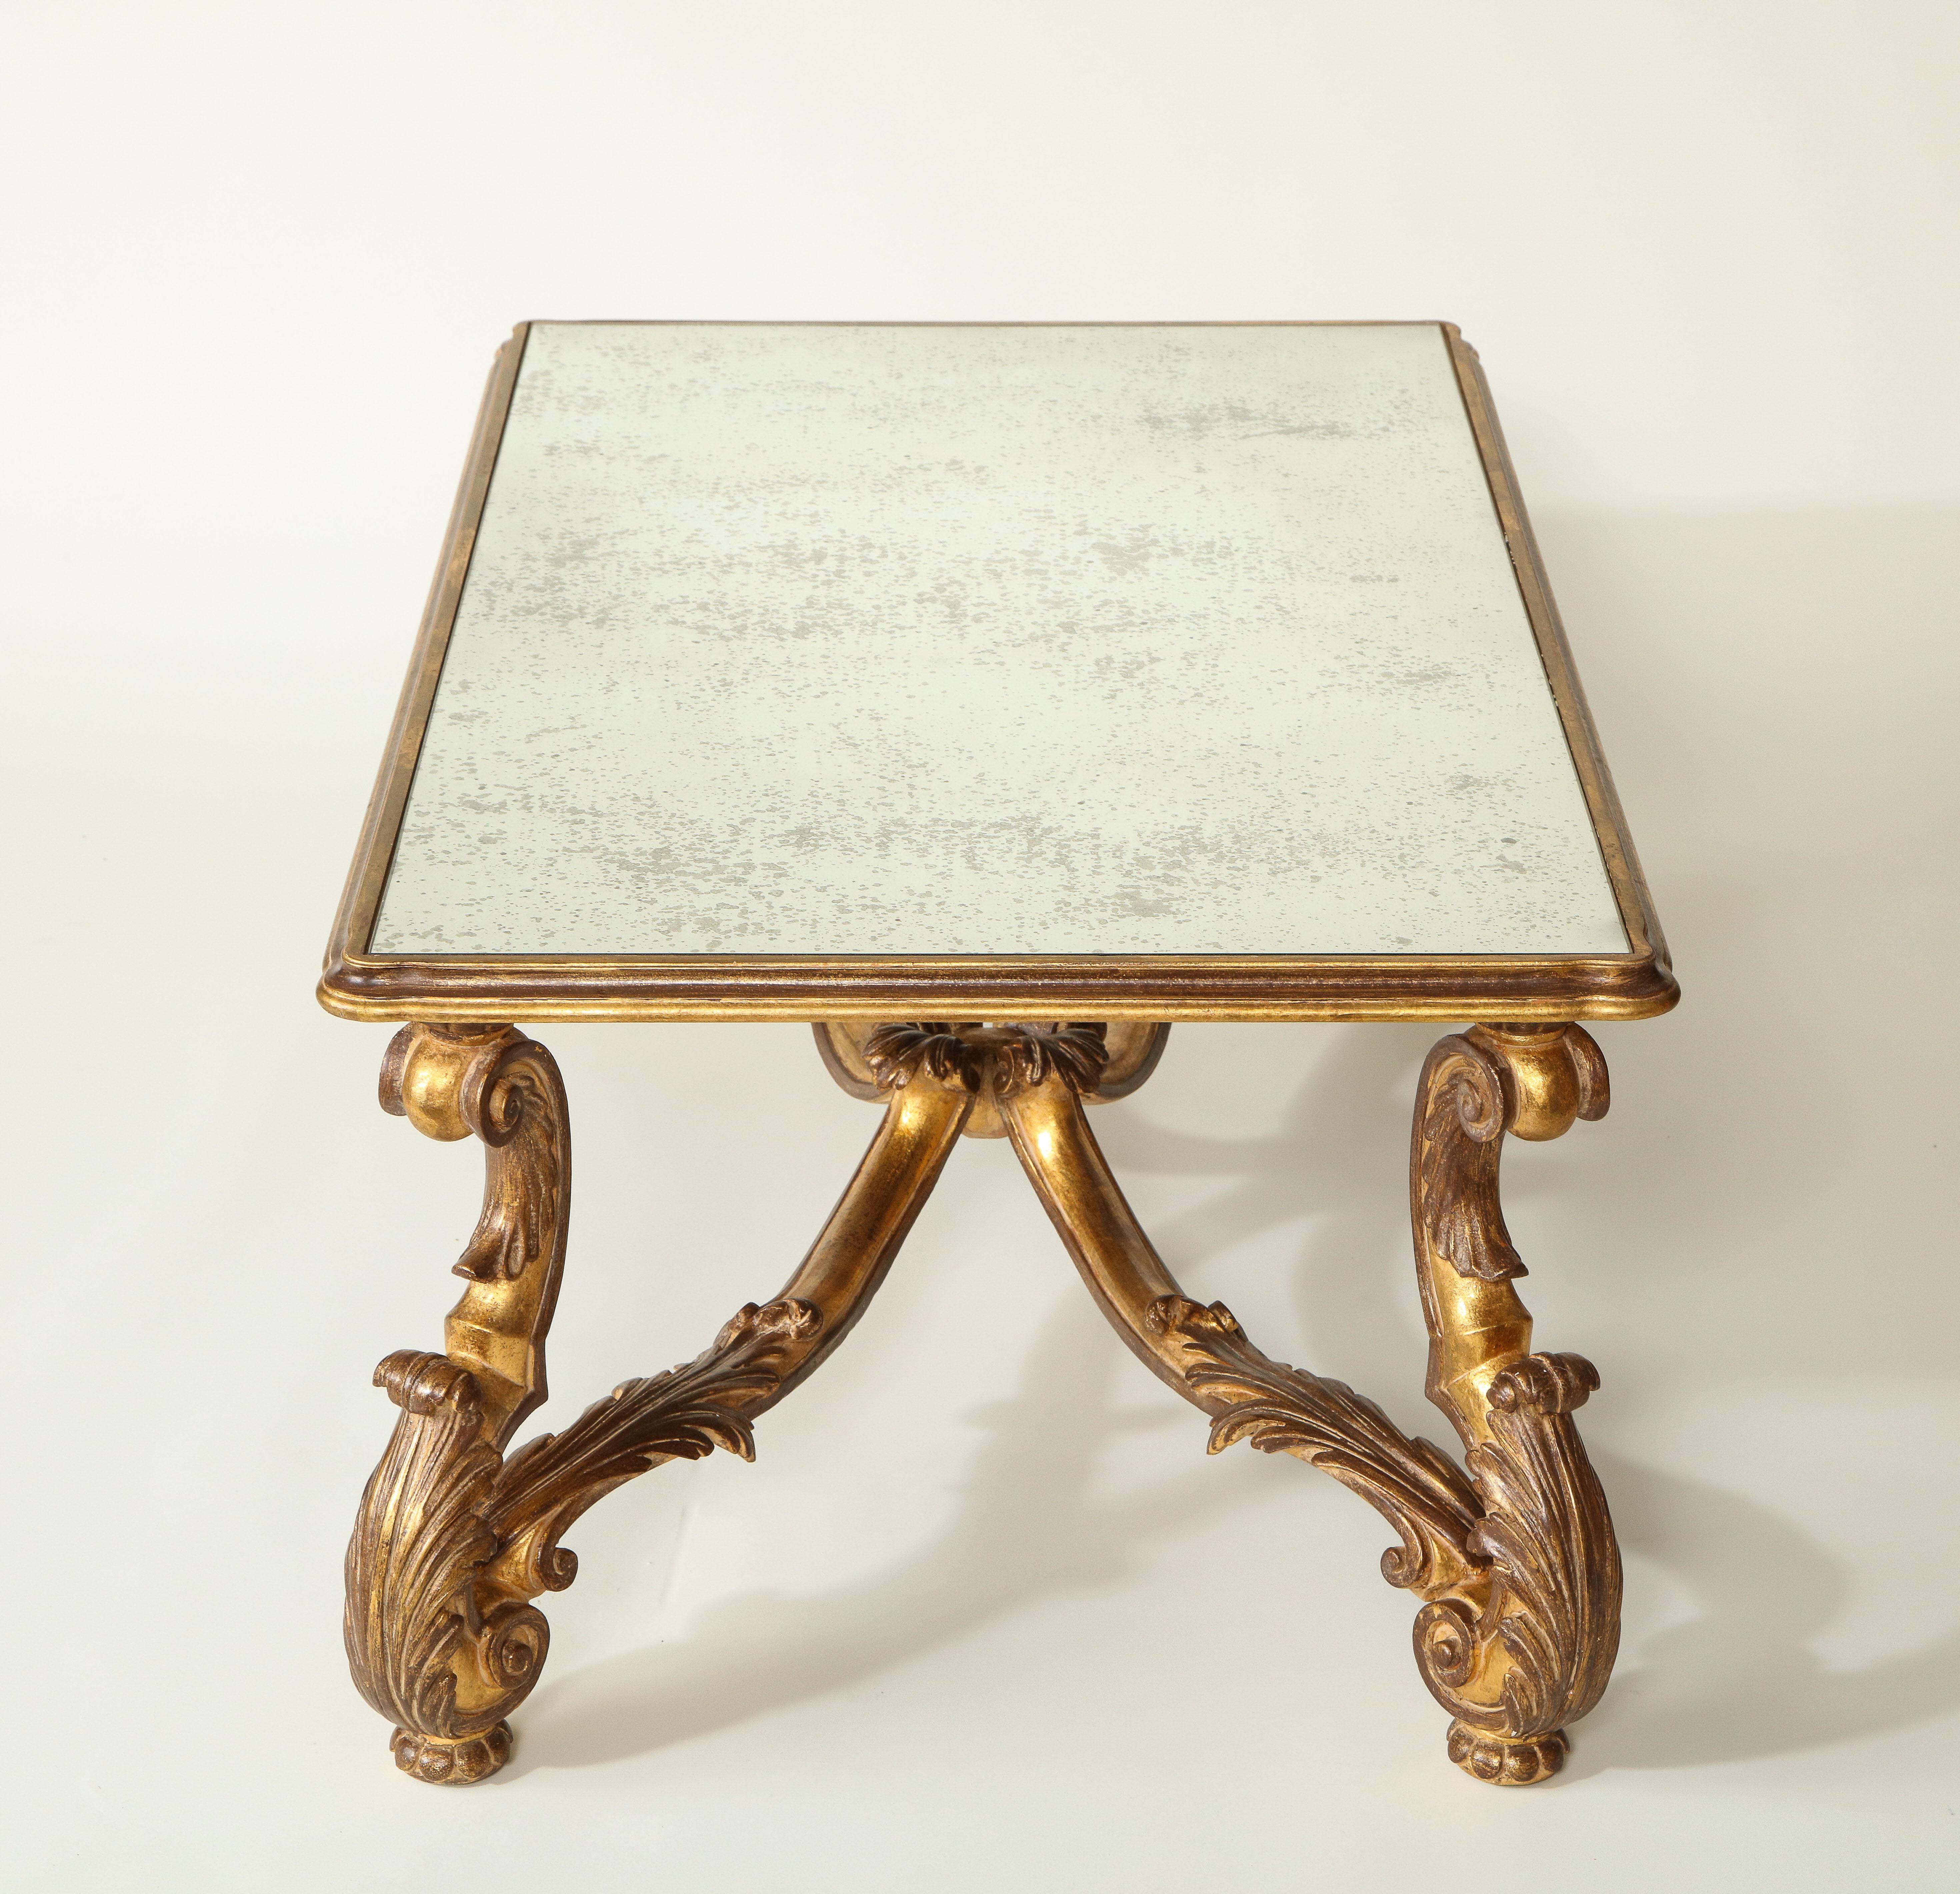 20th Century Neo-Baroque Giltwood and Mirror Coffee Table